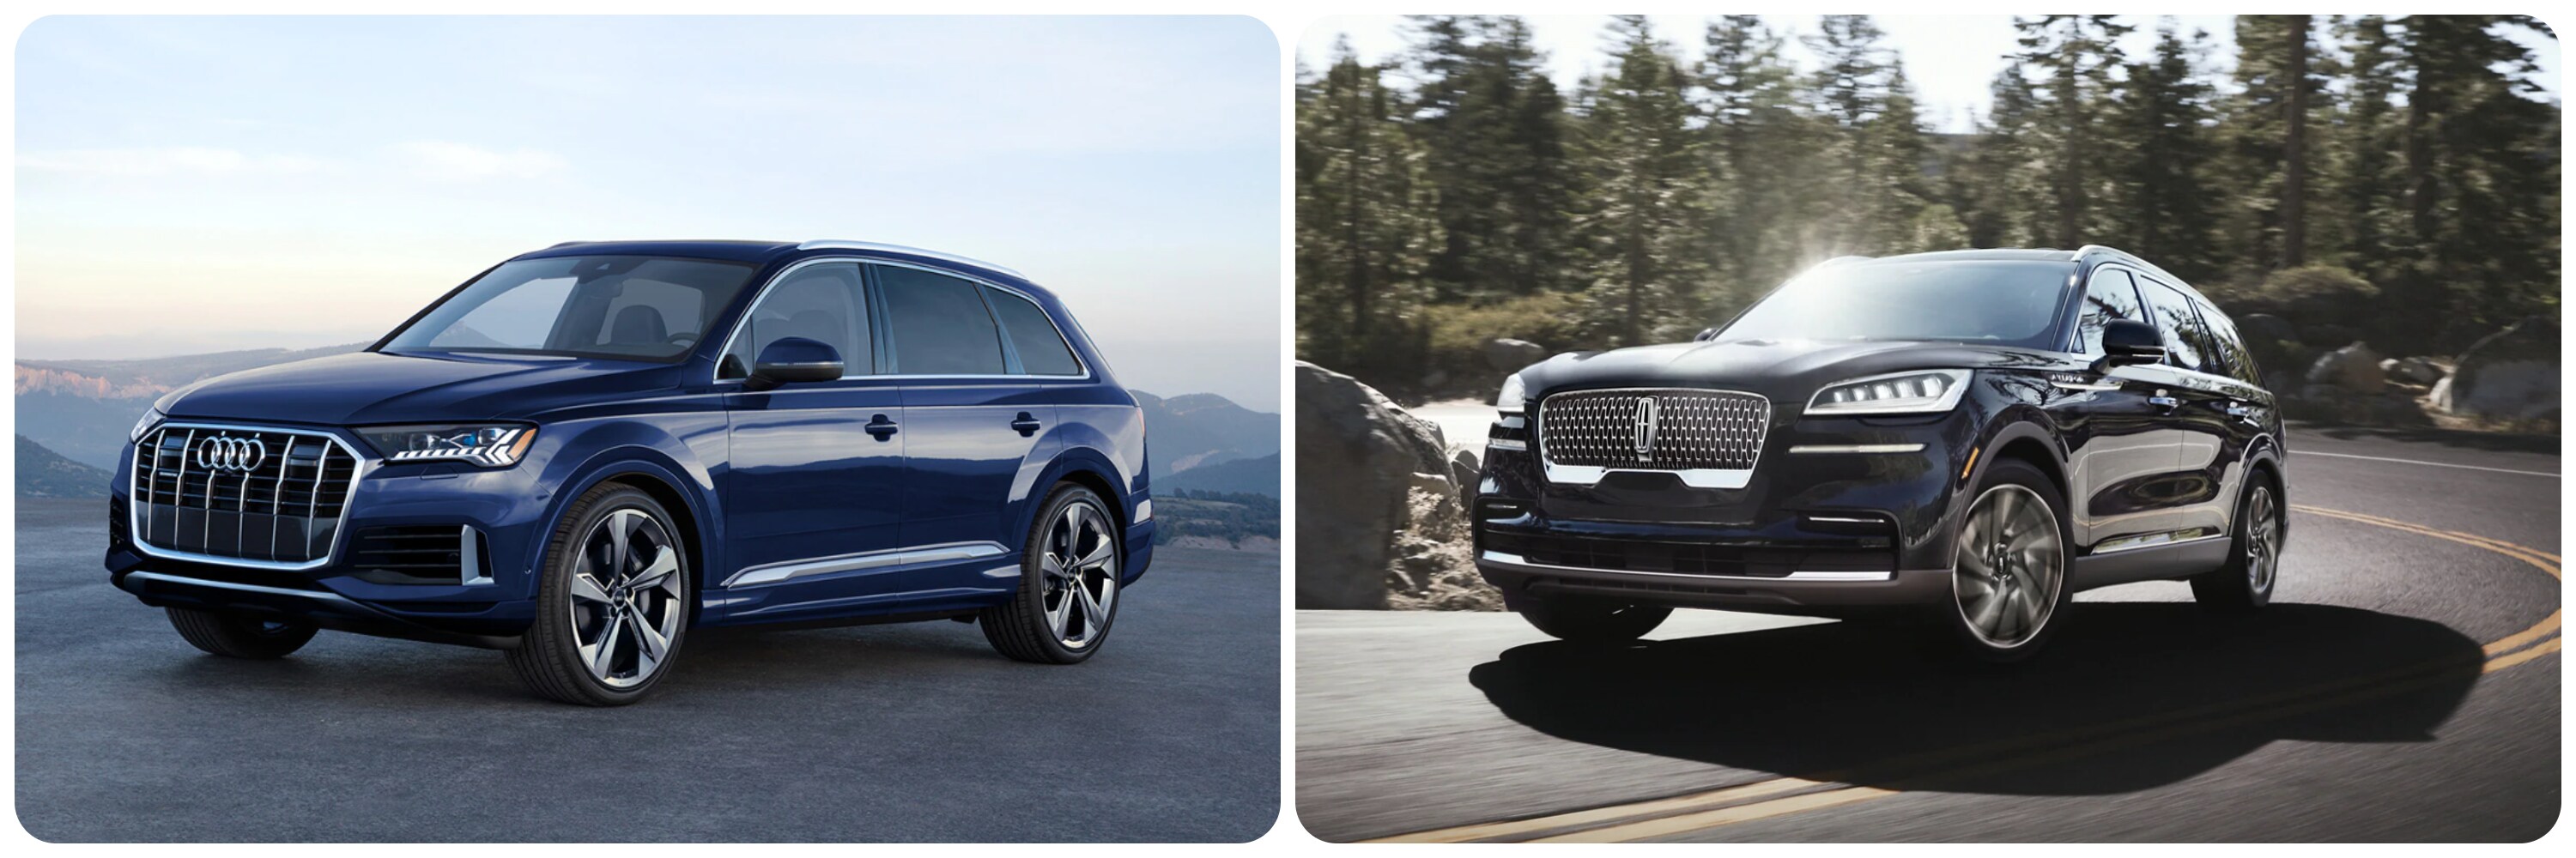 On the left an angled view showing the profile and front of a parked dark blue 2022 Audi Q7 with mountains in the distance. On the right, a black 2022 Lincoln Navigator takes a bend in the road as it drives up a mountain on a sunny day.